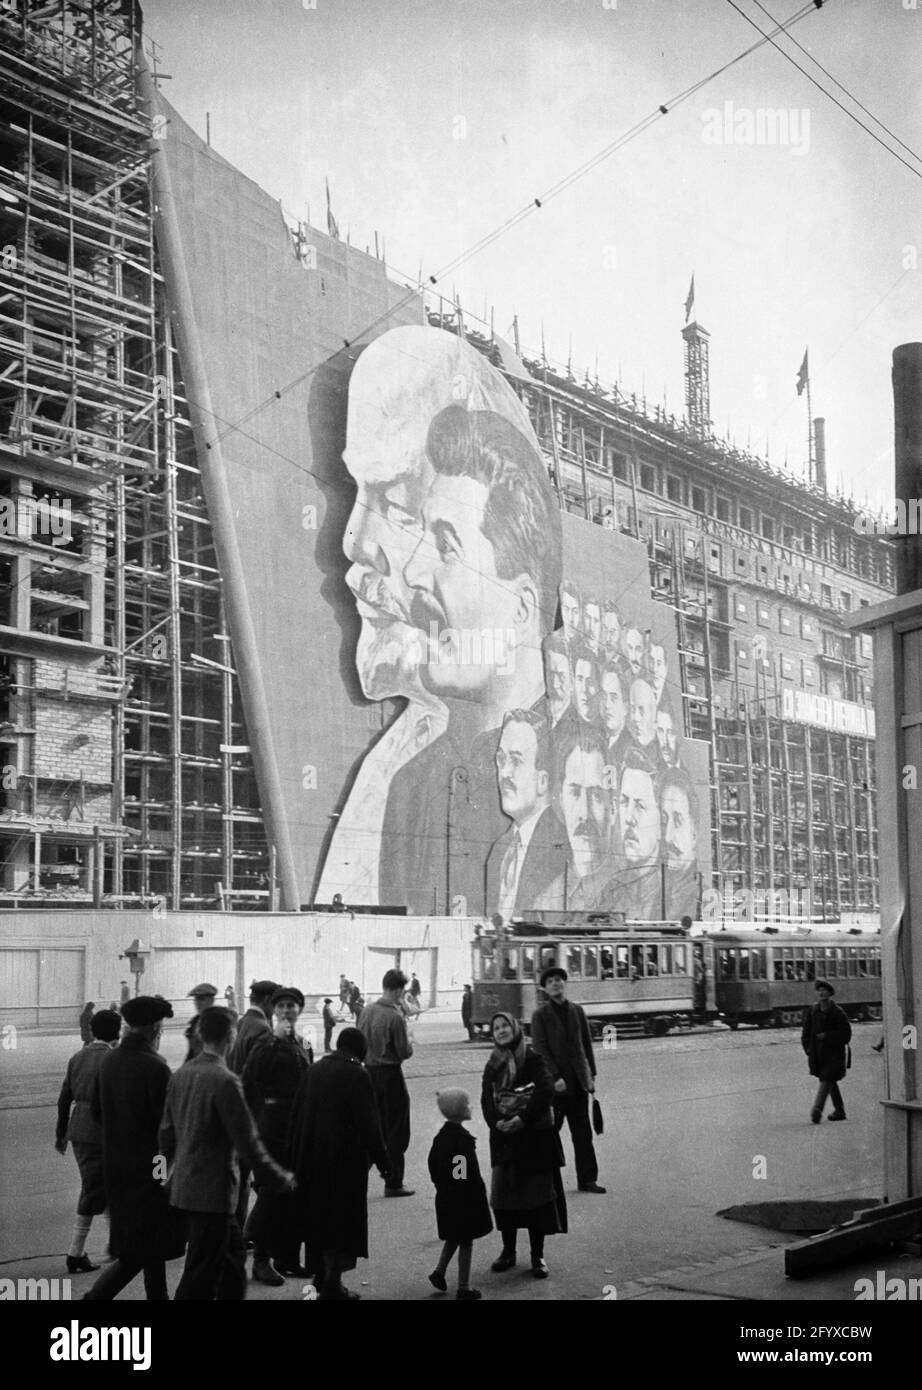 A large poster with portraits of Russian political leaders Vladimir Lenin, Joseph Stalin and others for the May Day parade hangs over the scaffolding of a building under construction, Moscow, Russia, 1934. (Photo by Burton Holmes) Stock Photo